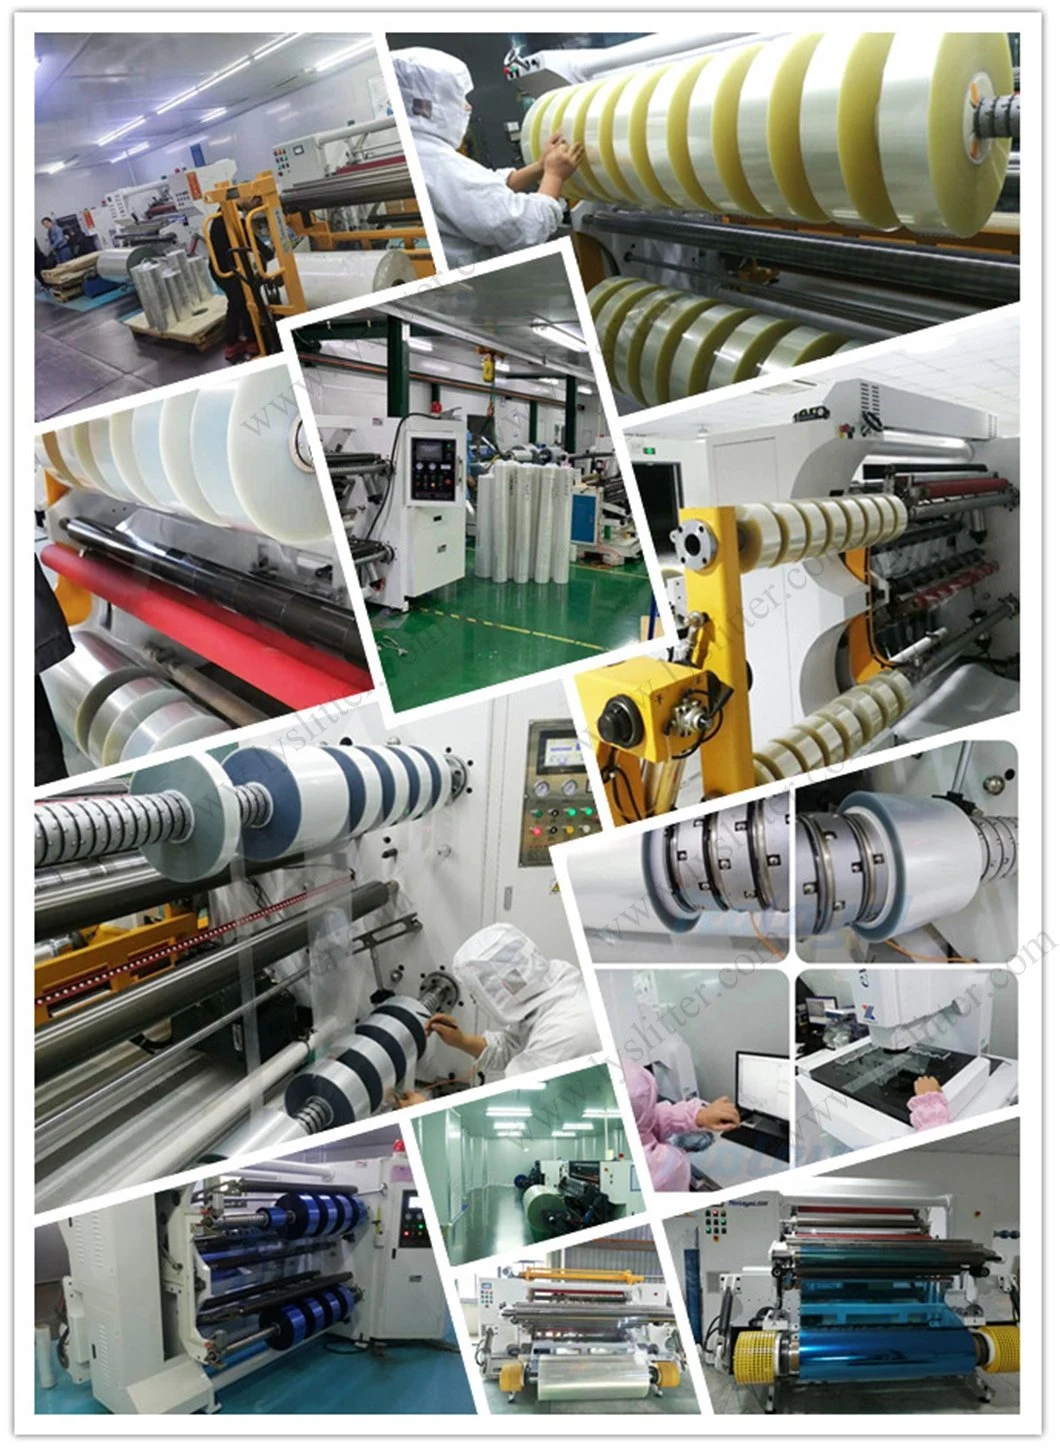 CNC Plccontrol High-Speed Slitting Rewinding Machine for Paper, Adhesive Label, Screen Protector Film, Self-Adhesive, Craft Paper, PVC Thick Film, Slicing